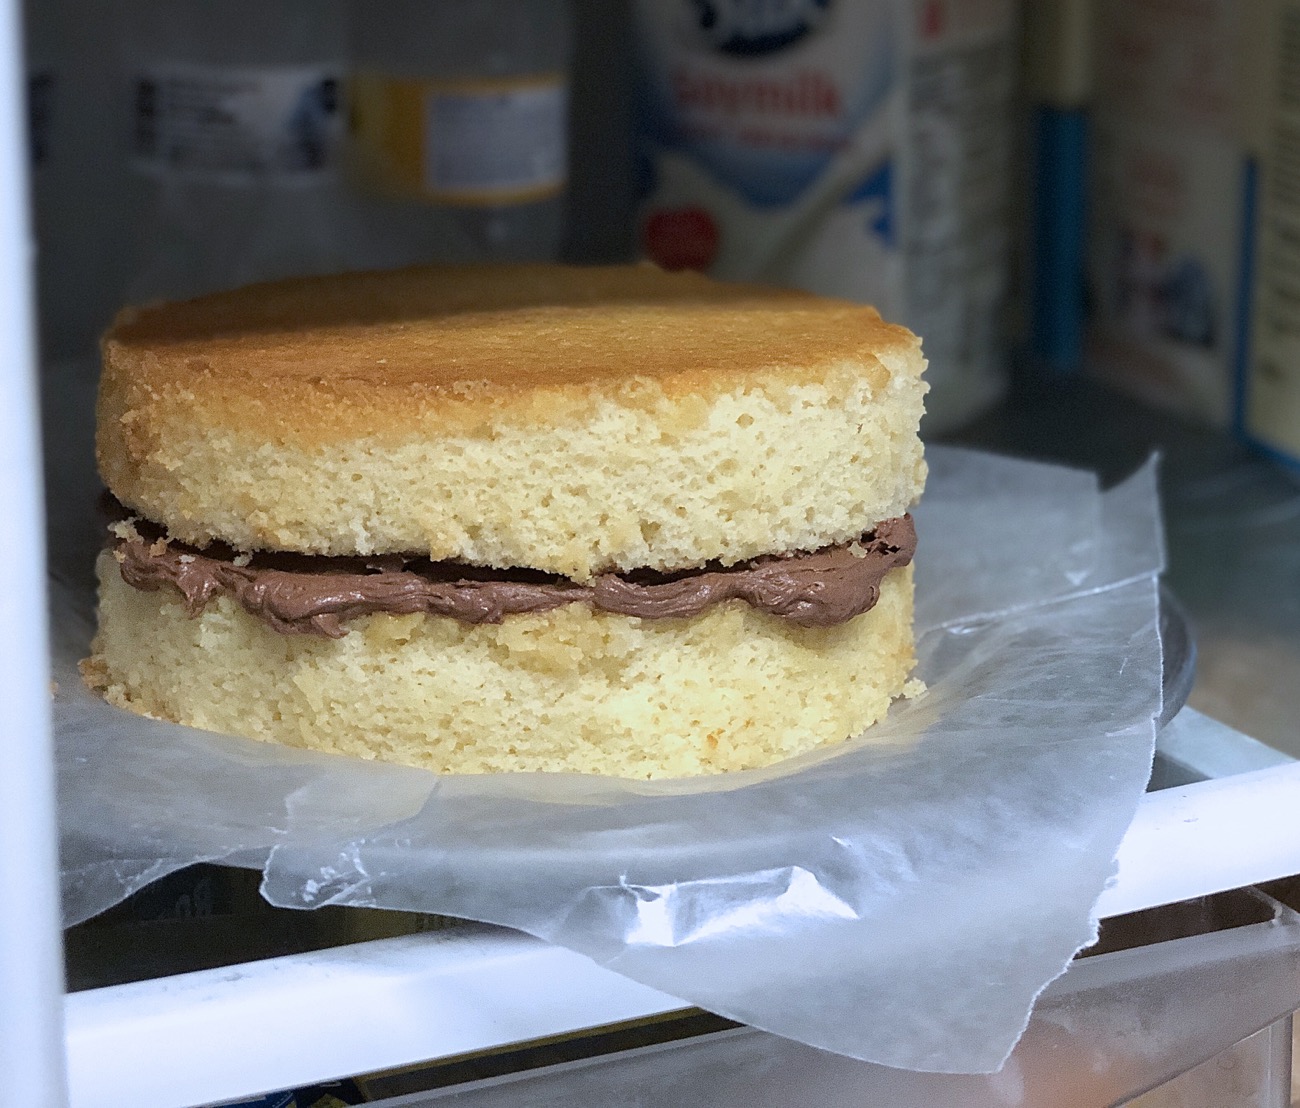 Unfrosted double-layer yellow cake, chocolate frosting in the middle, chilling in the refrigerator.